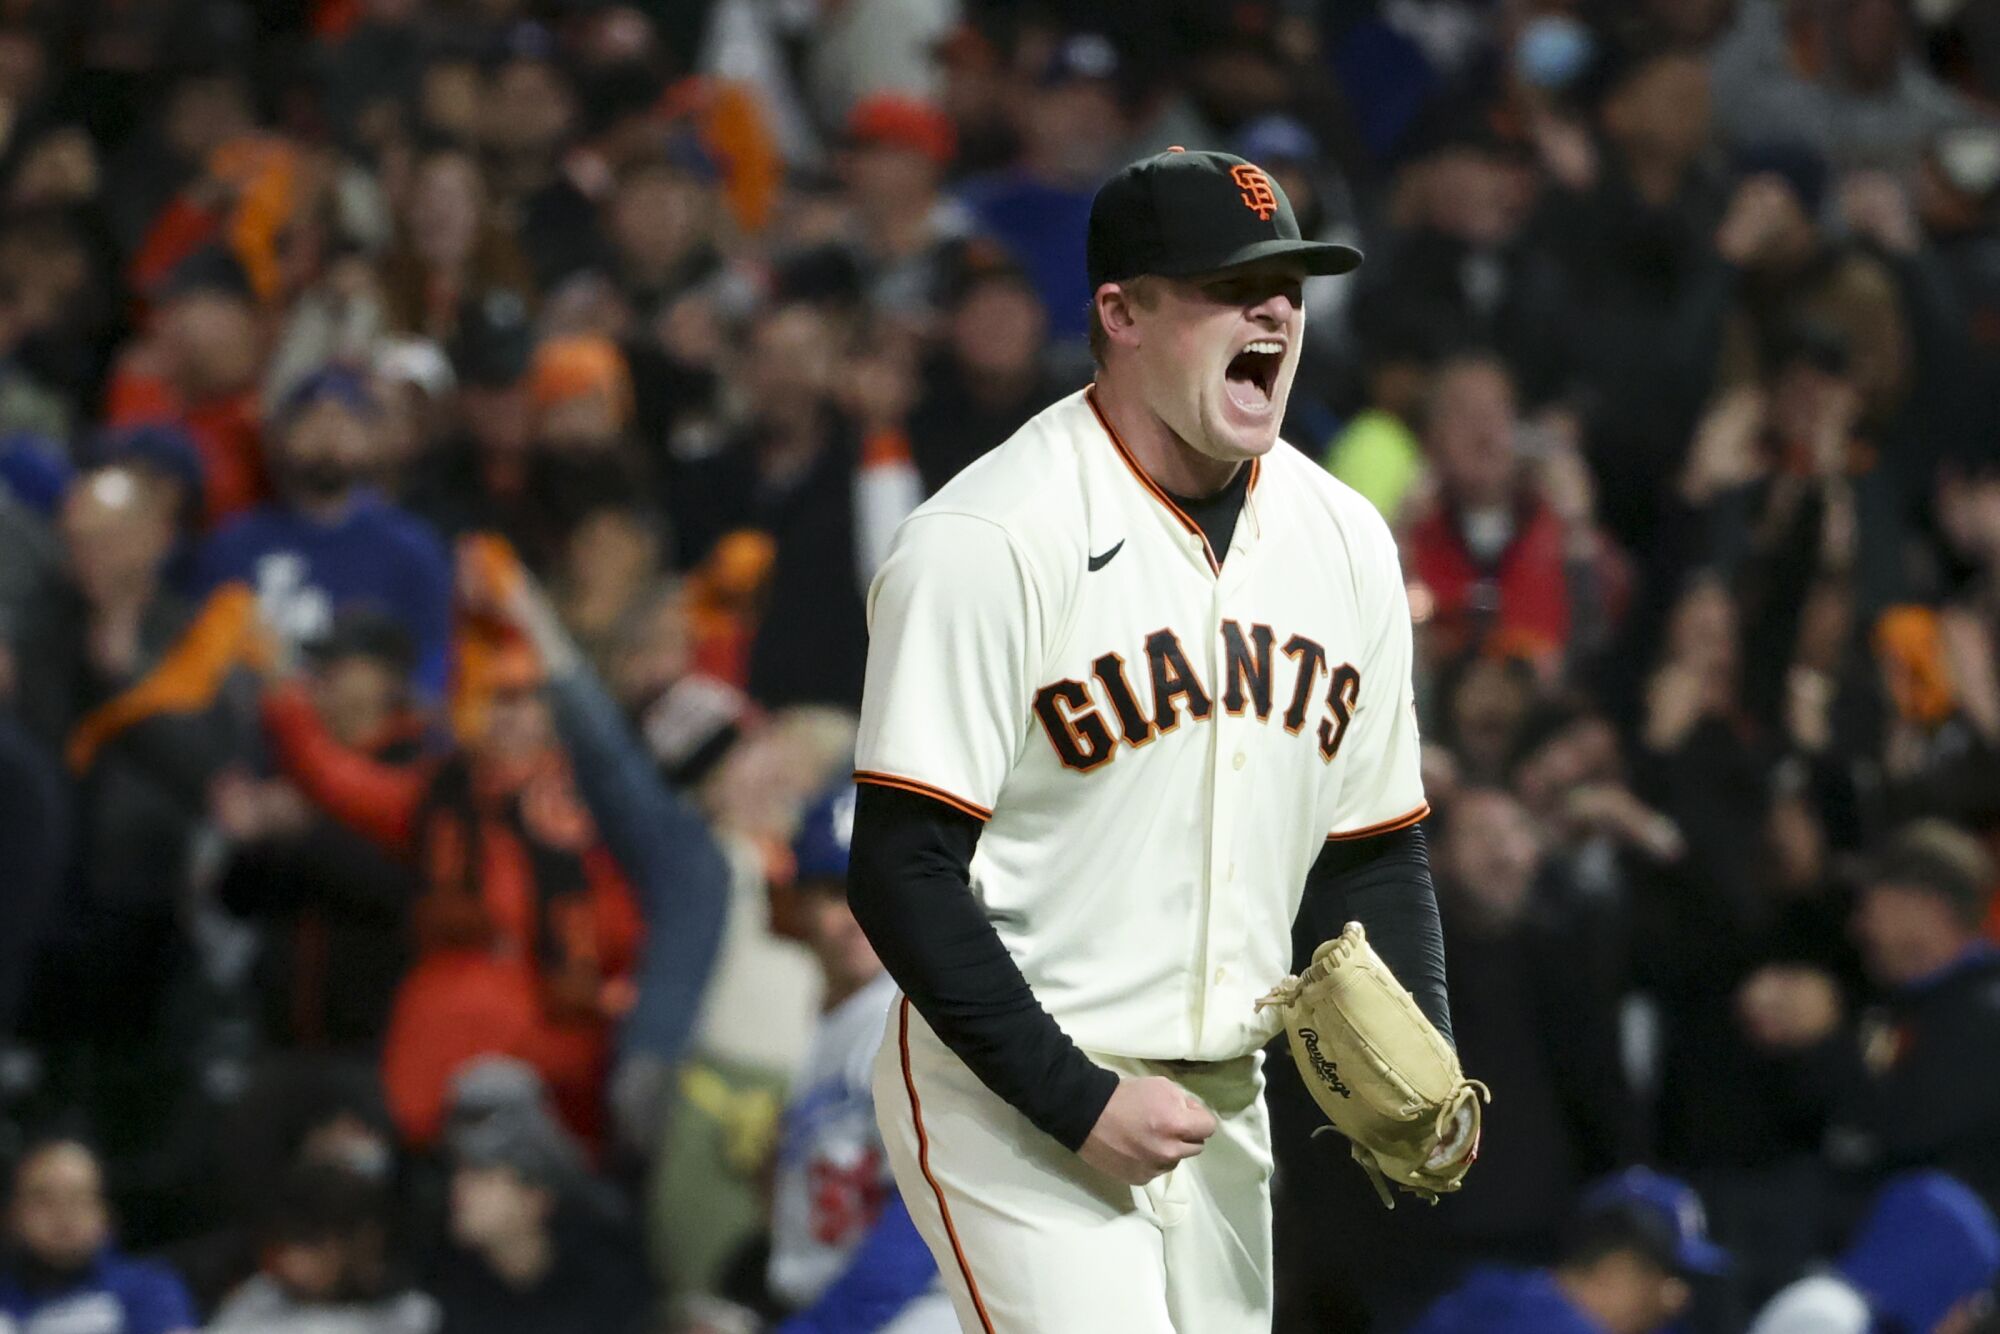 San Francisco Giants starting pitcher Logan Webb reacts after striking out Los Angeles Dodgers' Cody Bellinger